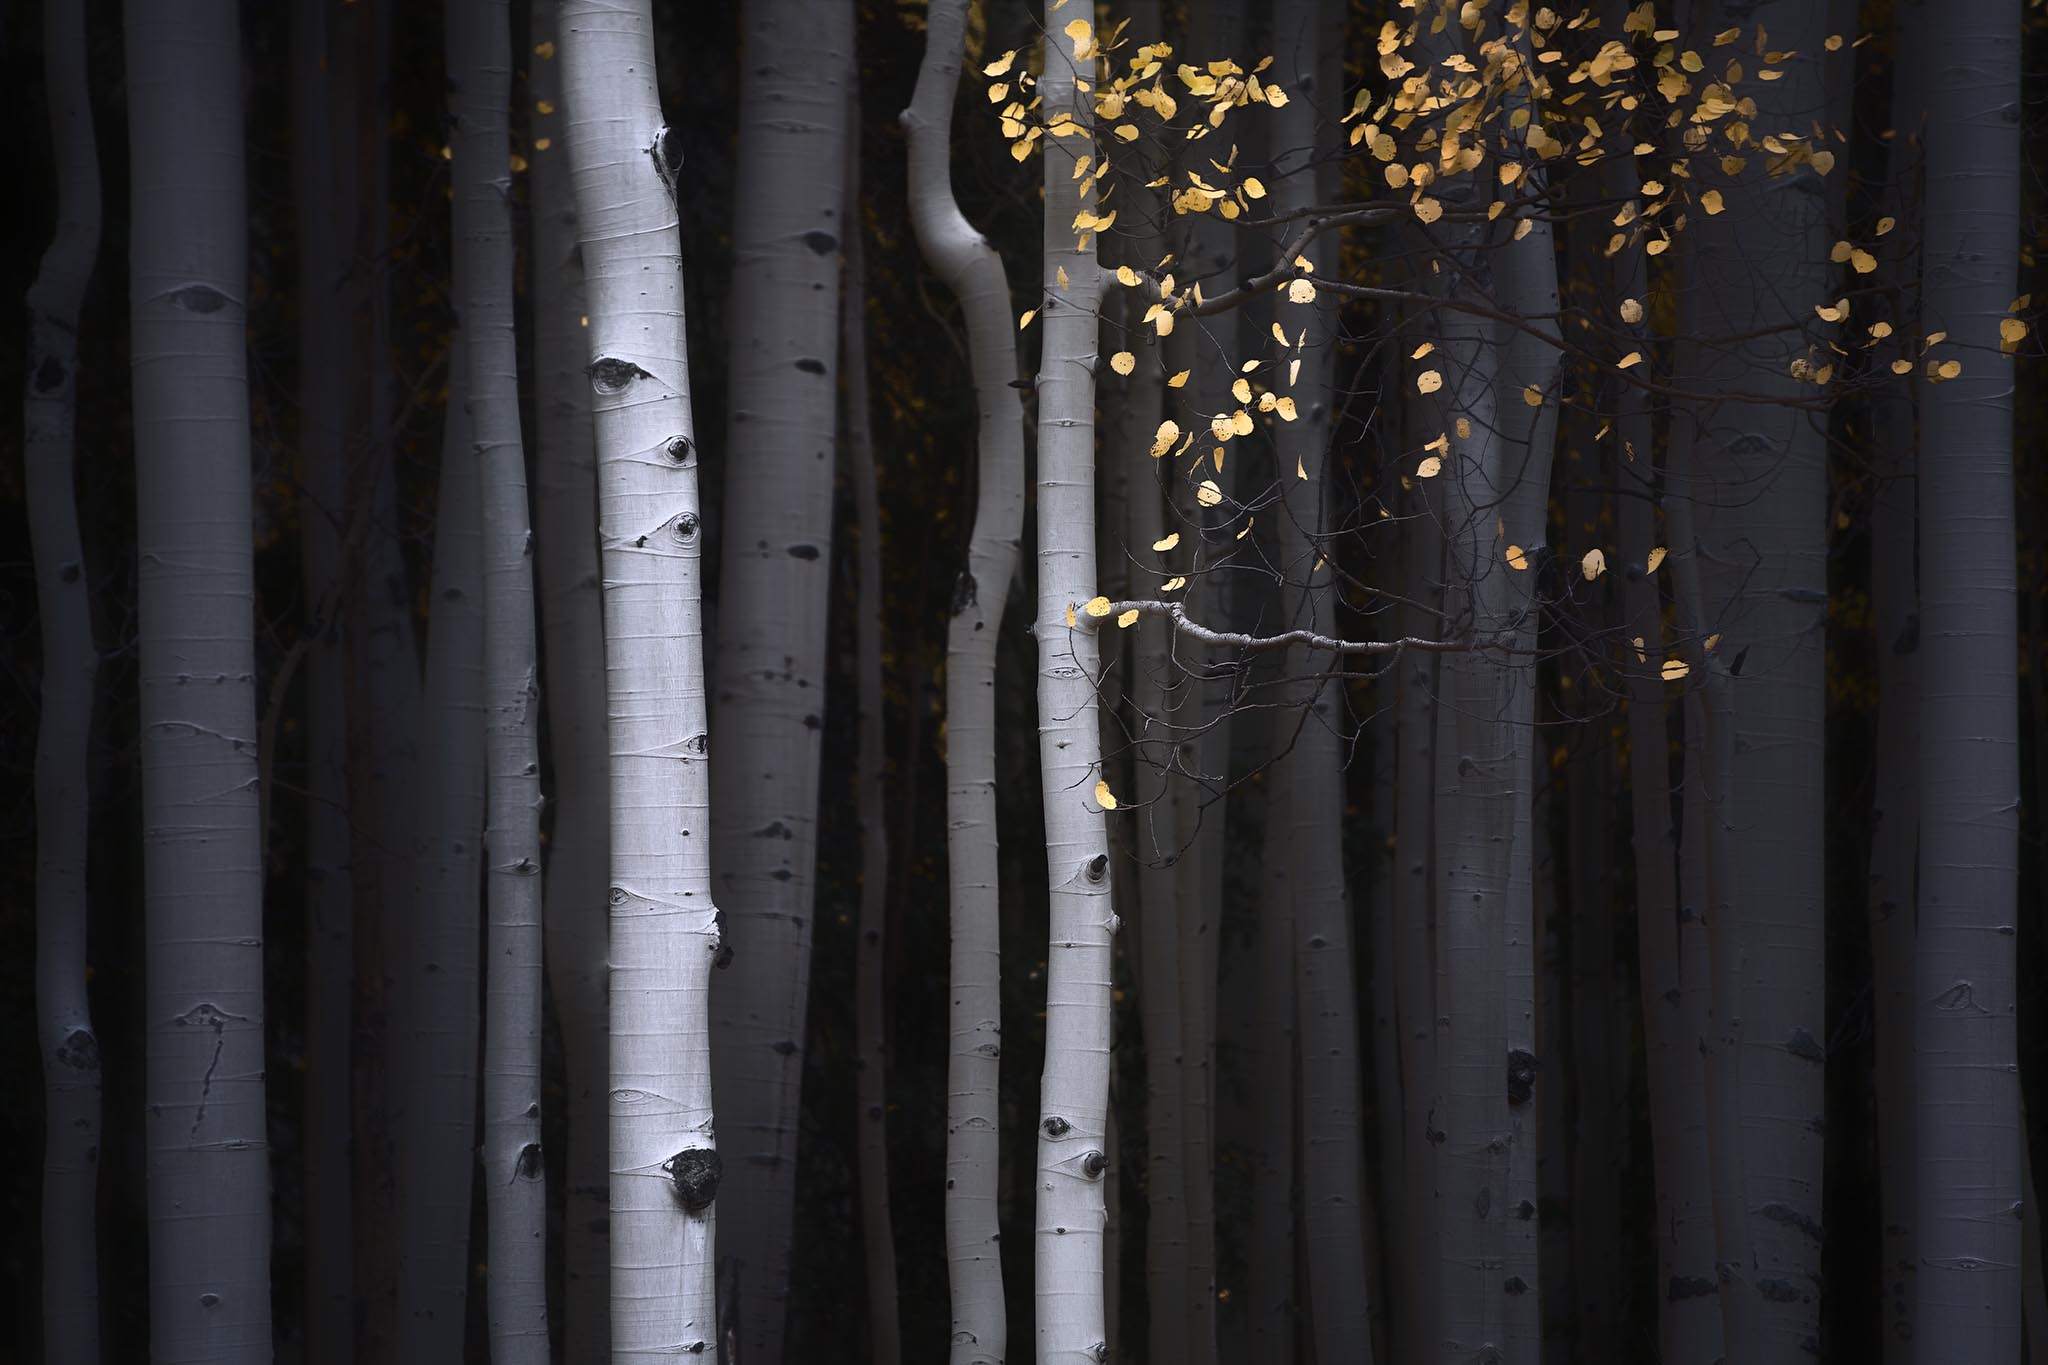 Aspen trees with gold leaves